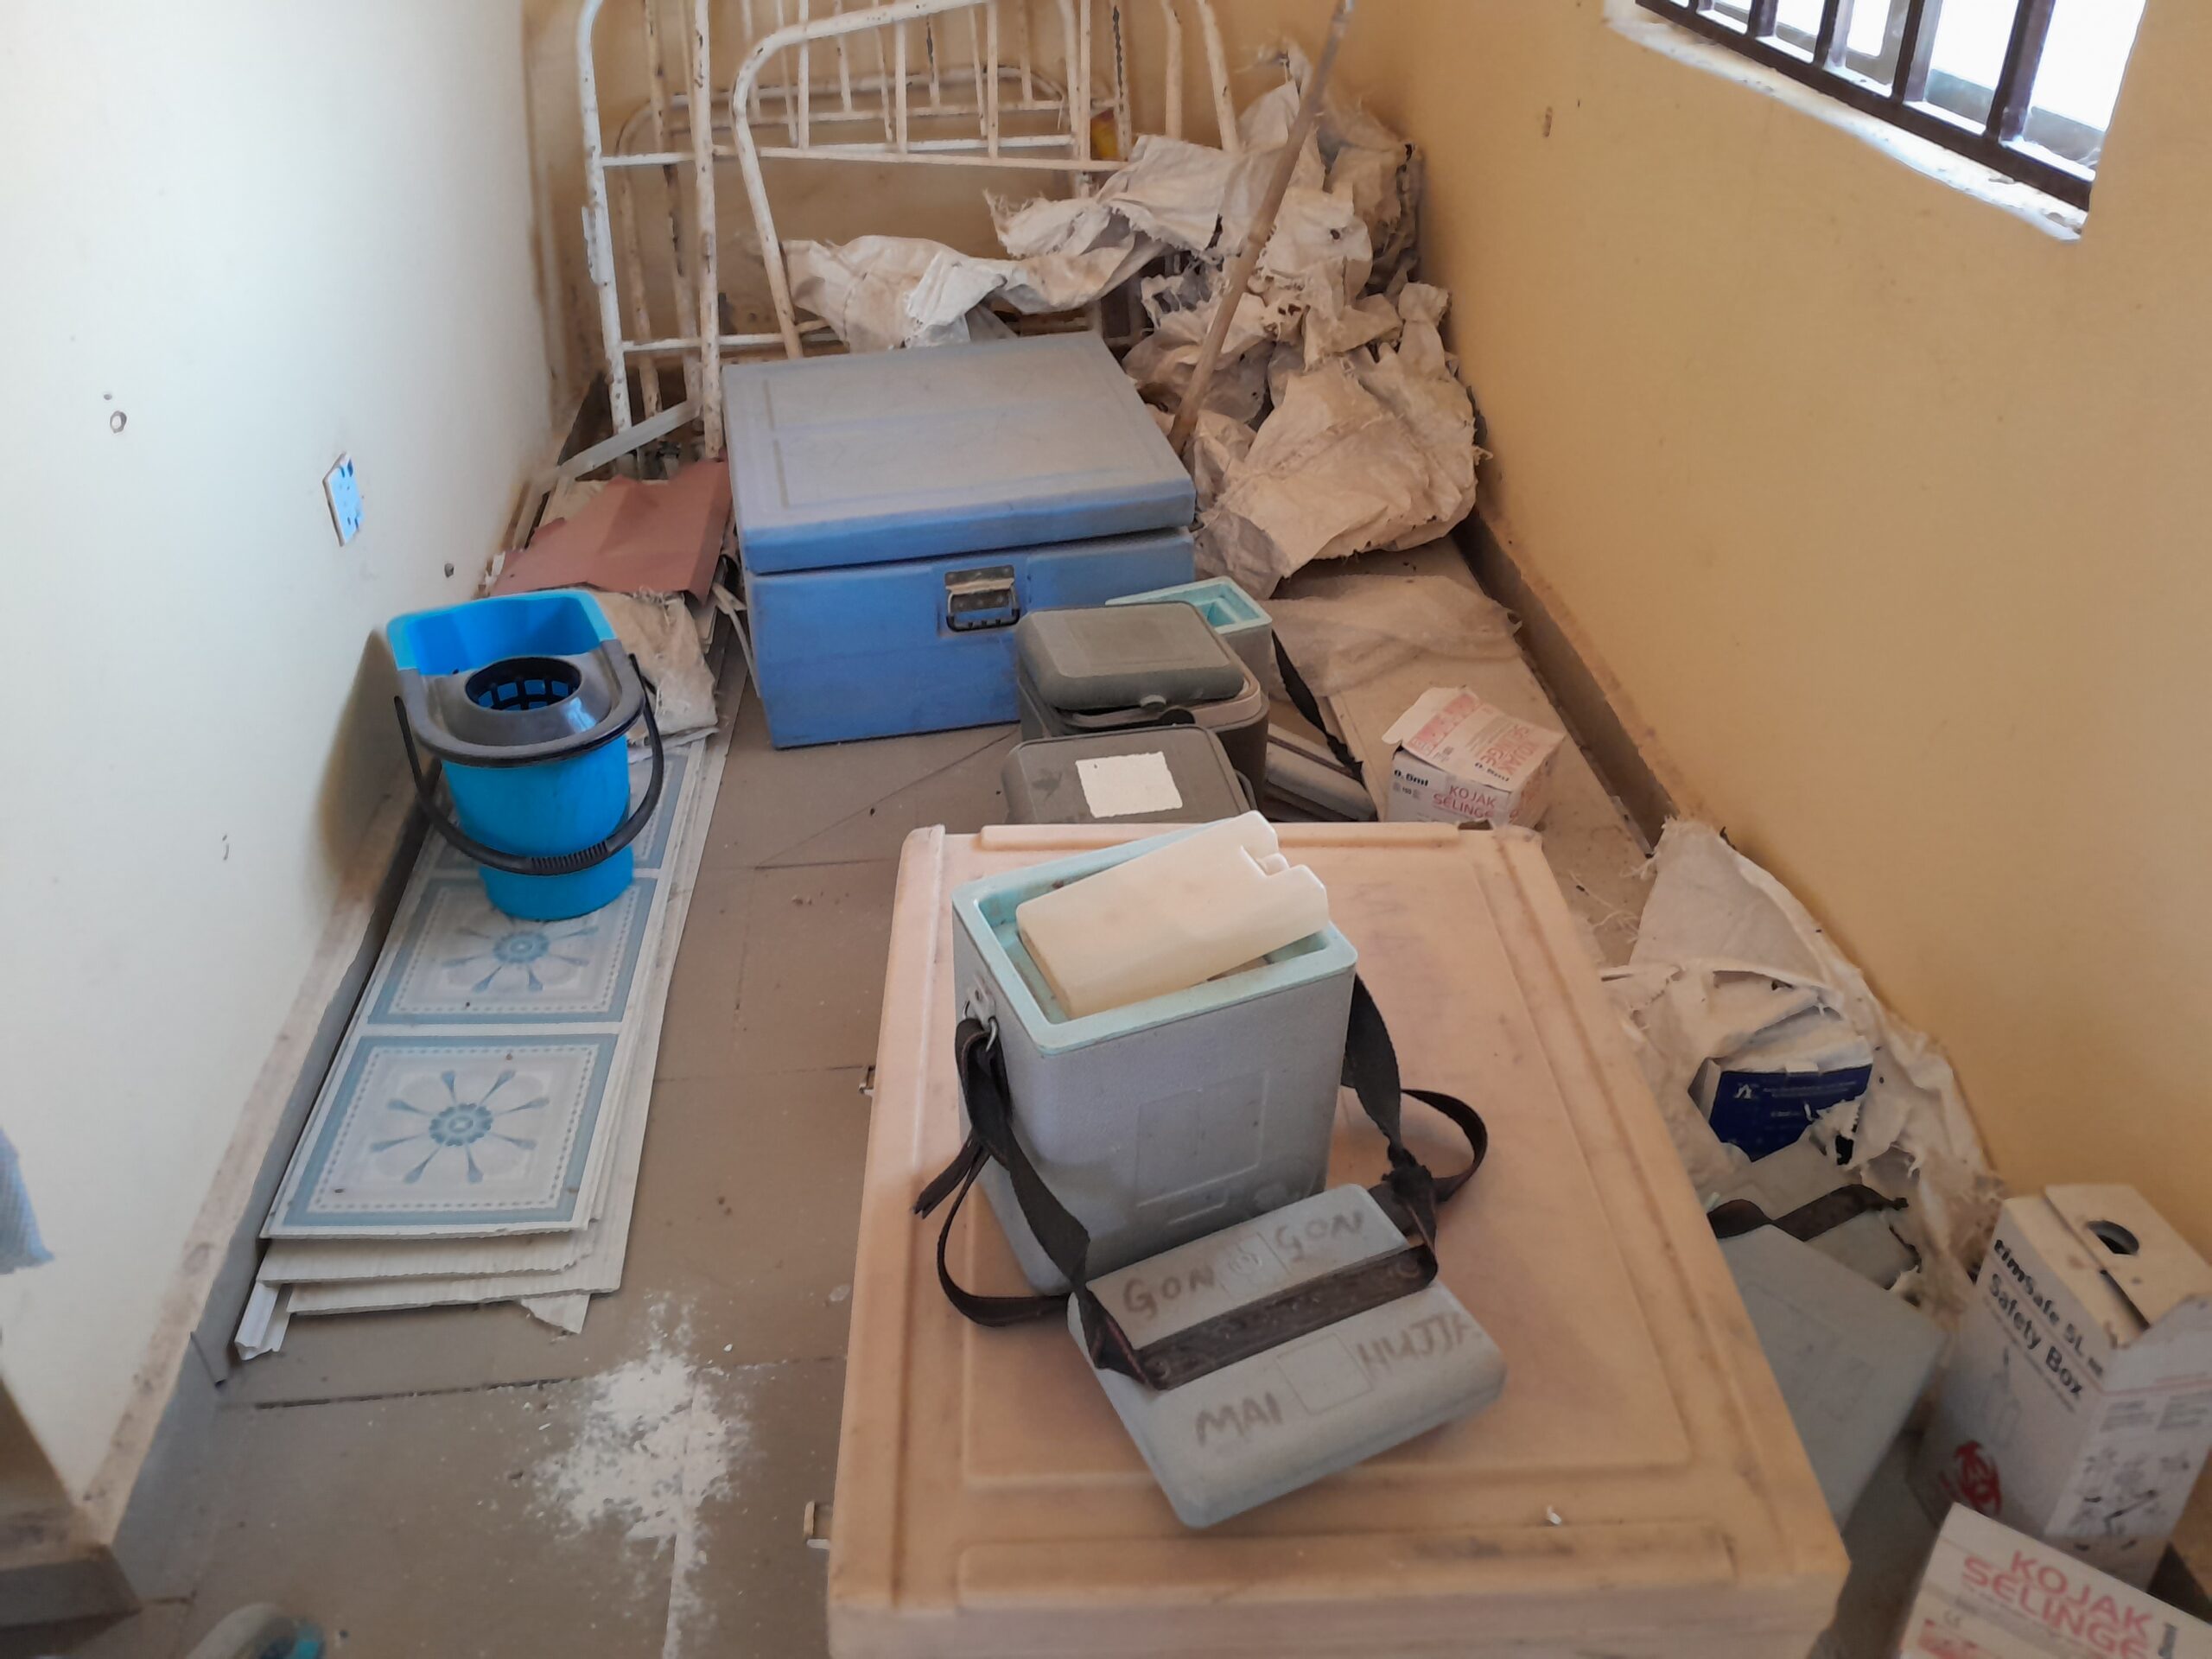 Medical equipment destroyed by the kidnappers when they invaded the healthcare facility looking for Halima. Photo Credit Yahuza Bawage.